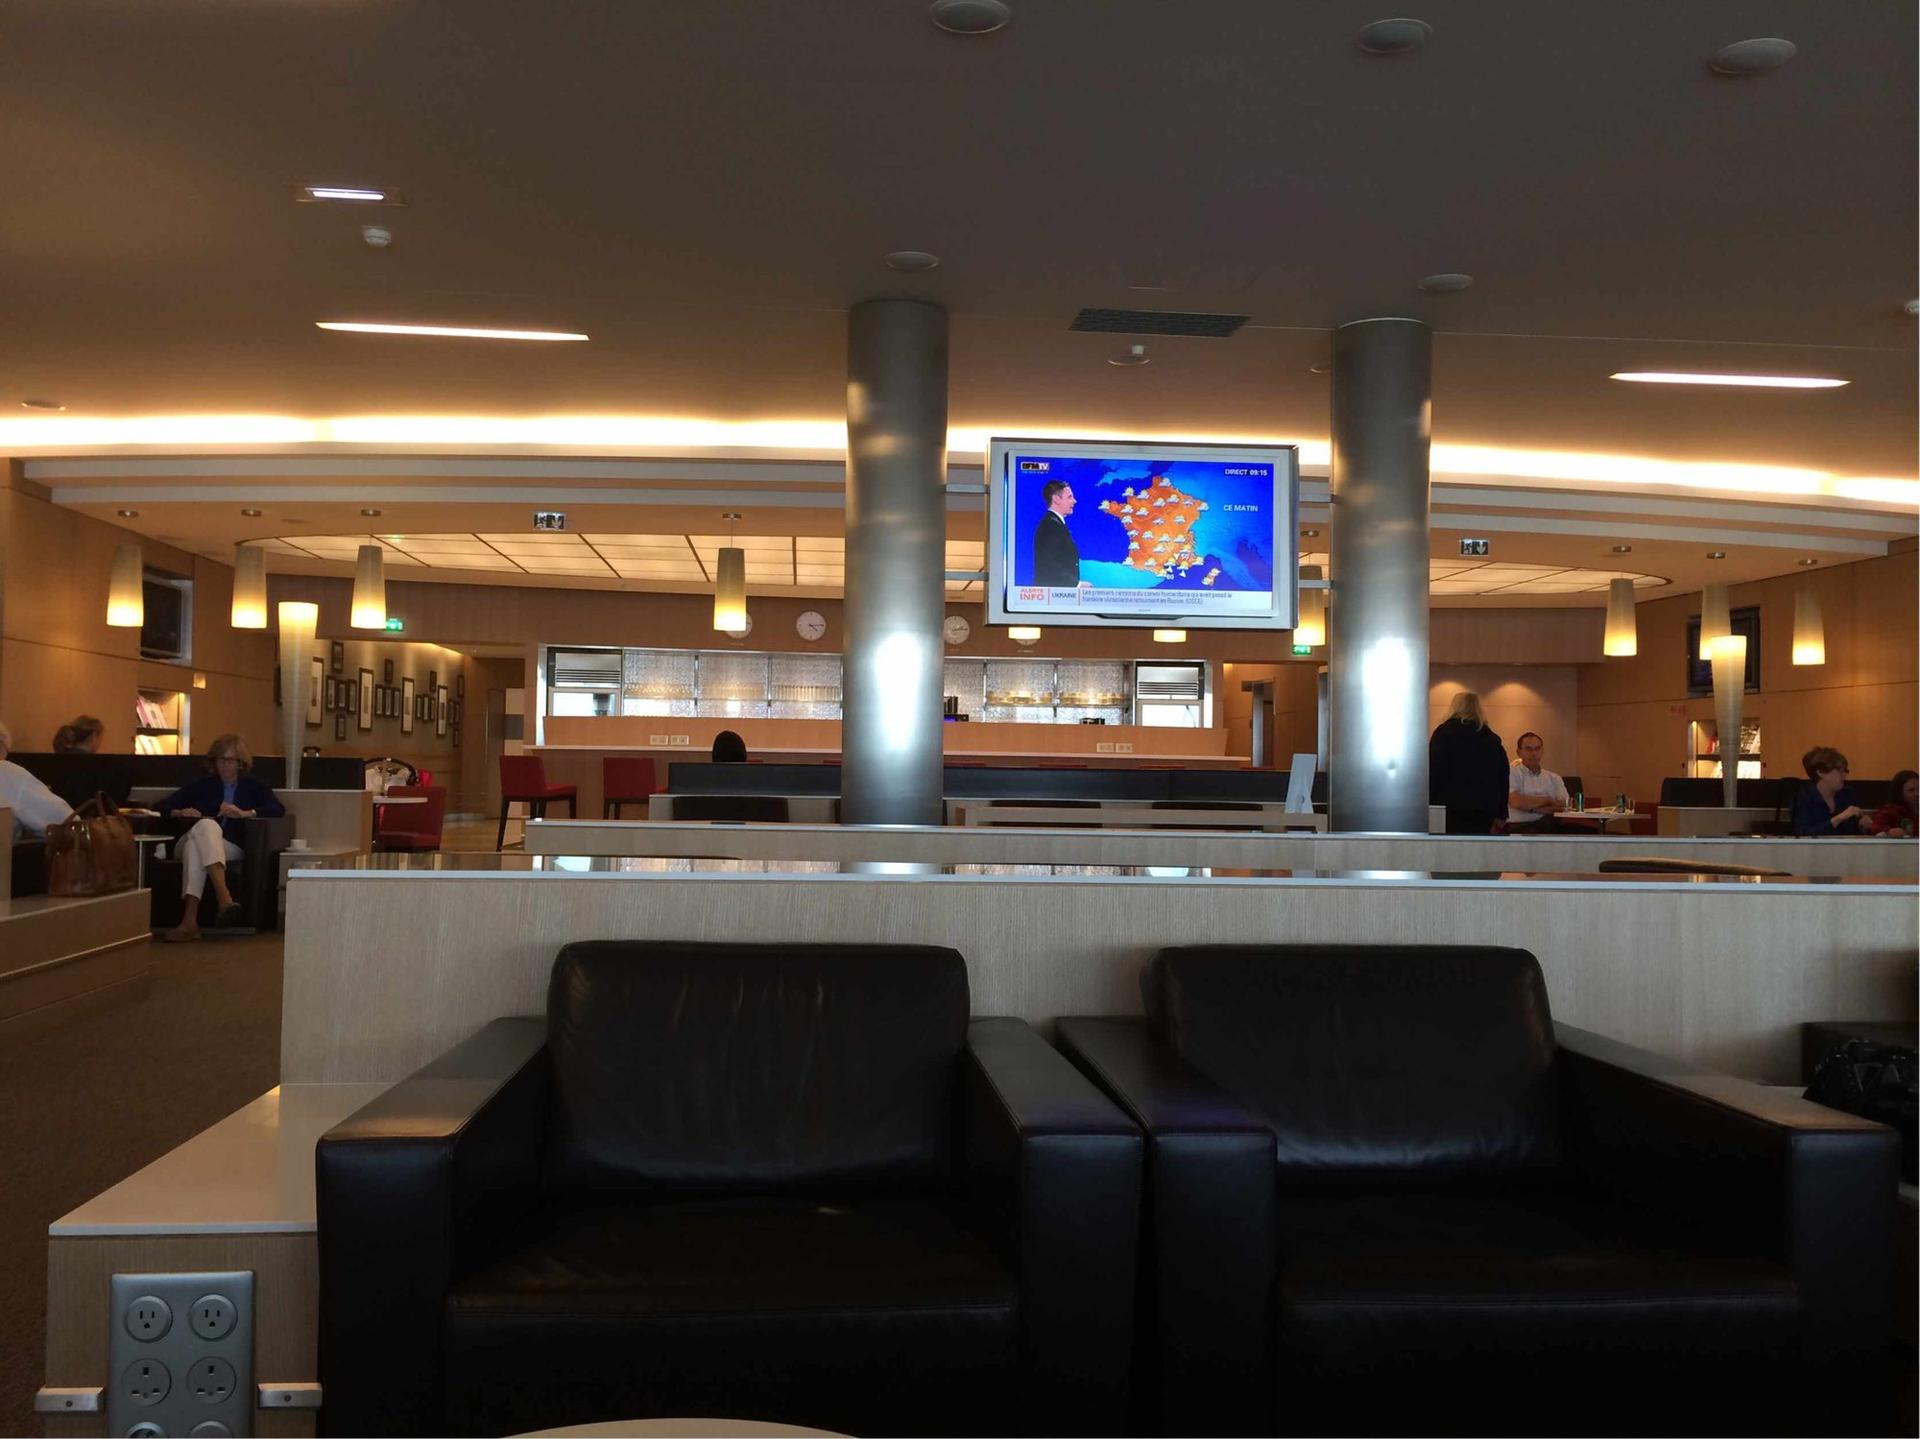 American Airlines Admirals Club  image 4 of 25